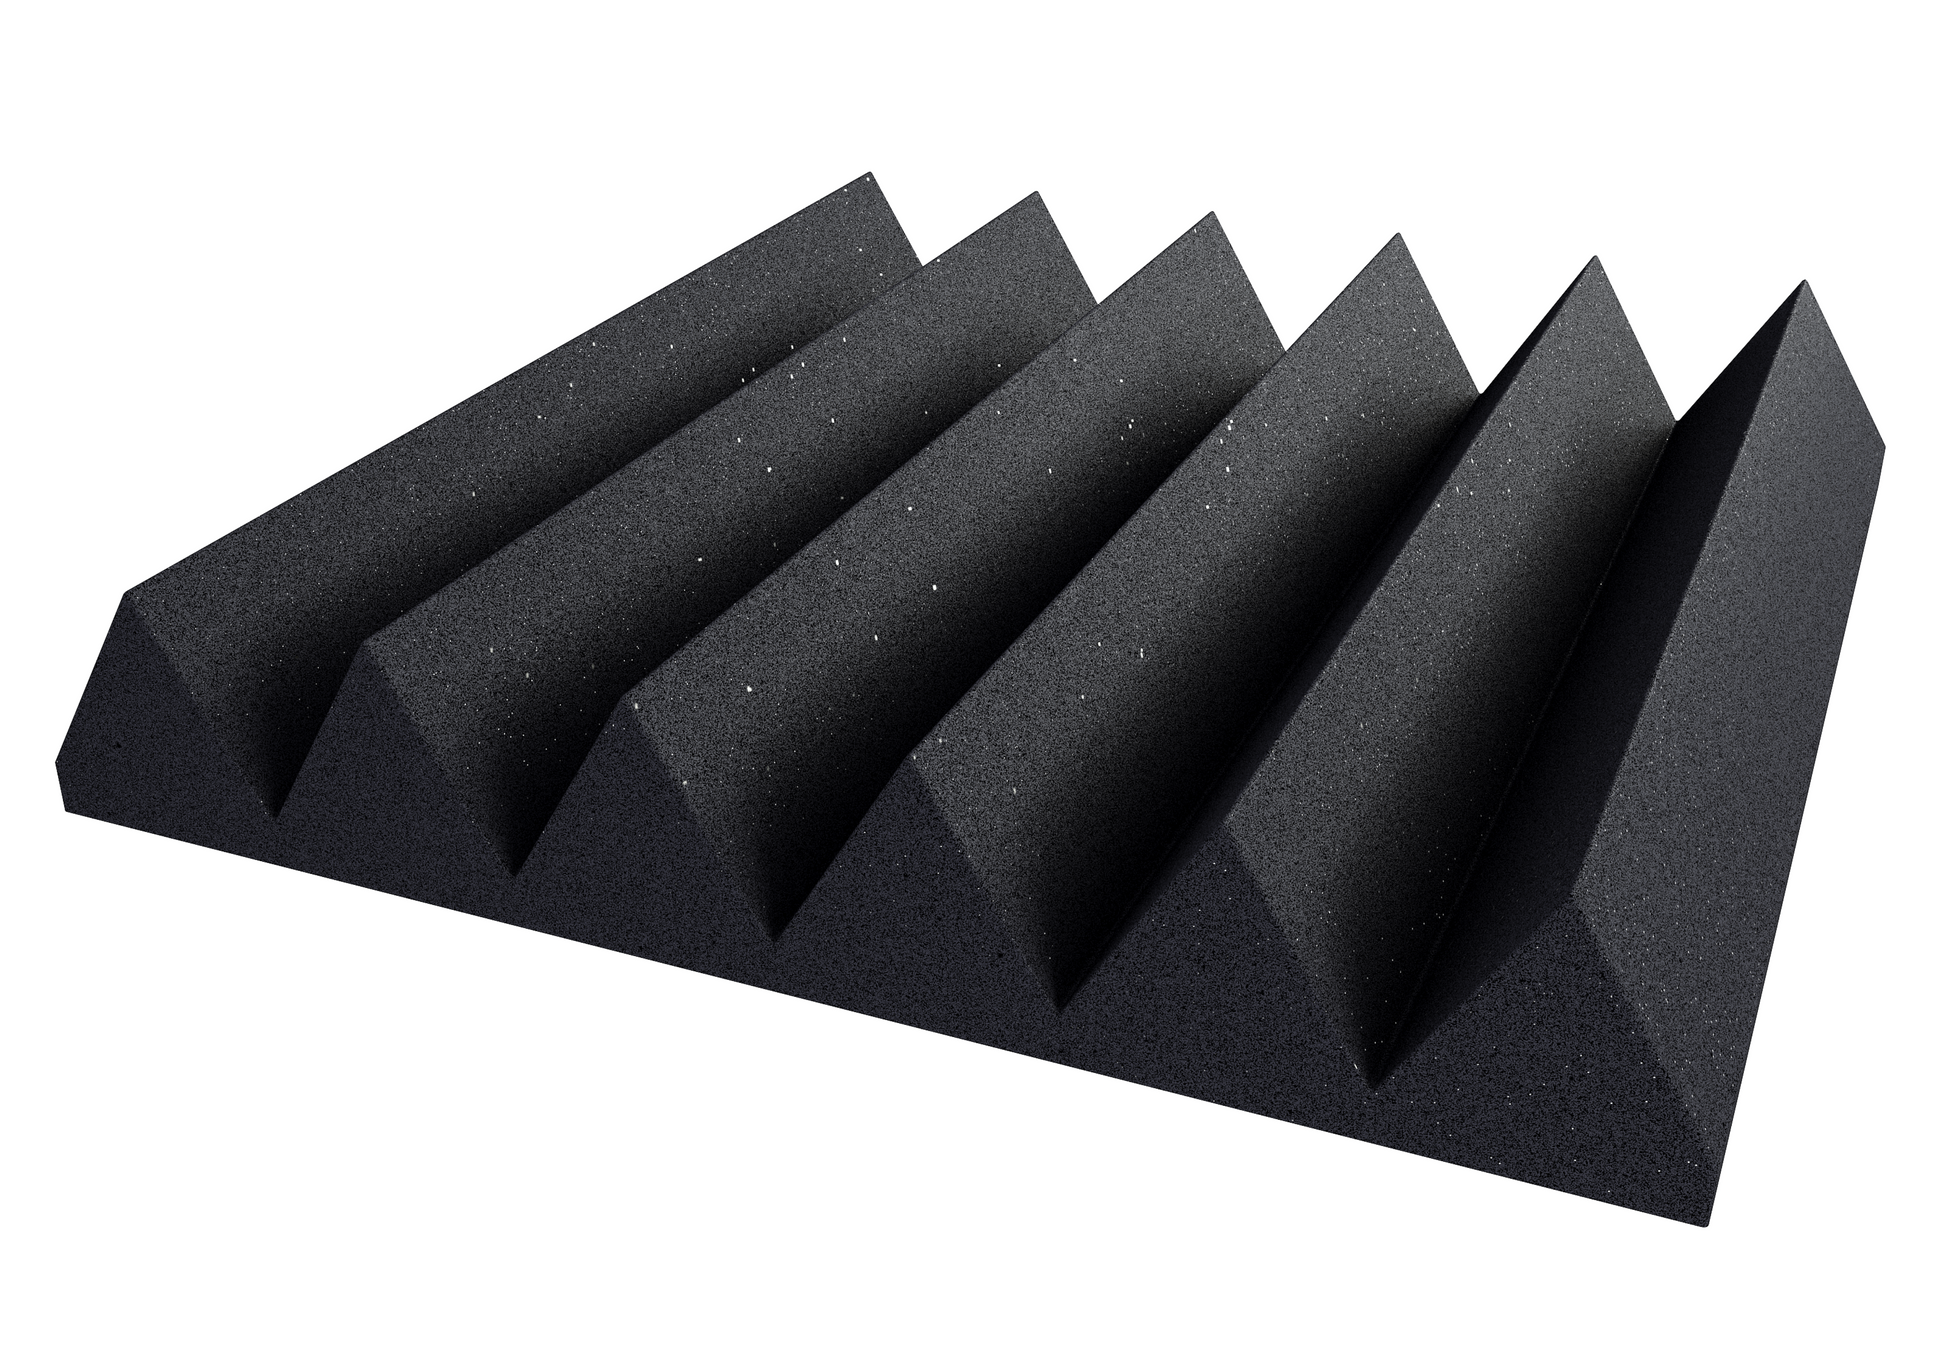 12x12x2 inch acoustic foam panel - charcoal color - wedge design with white background